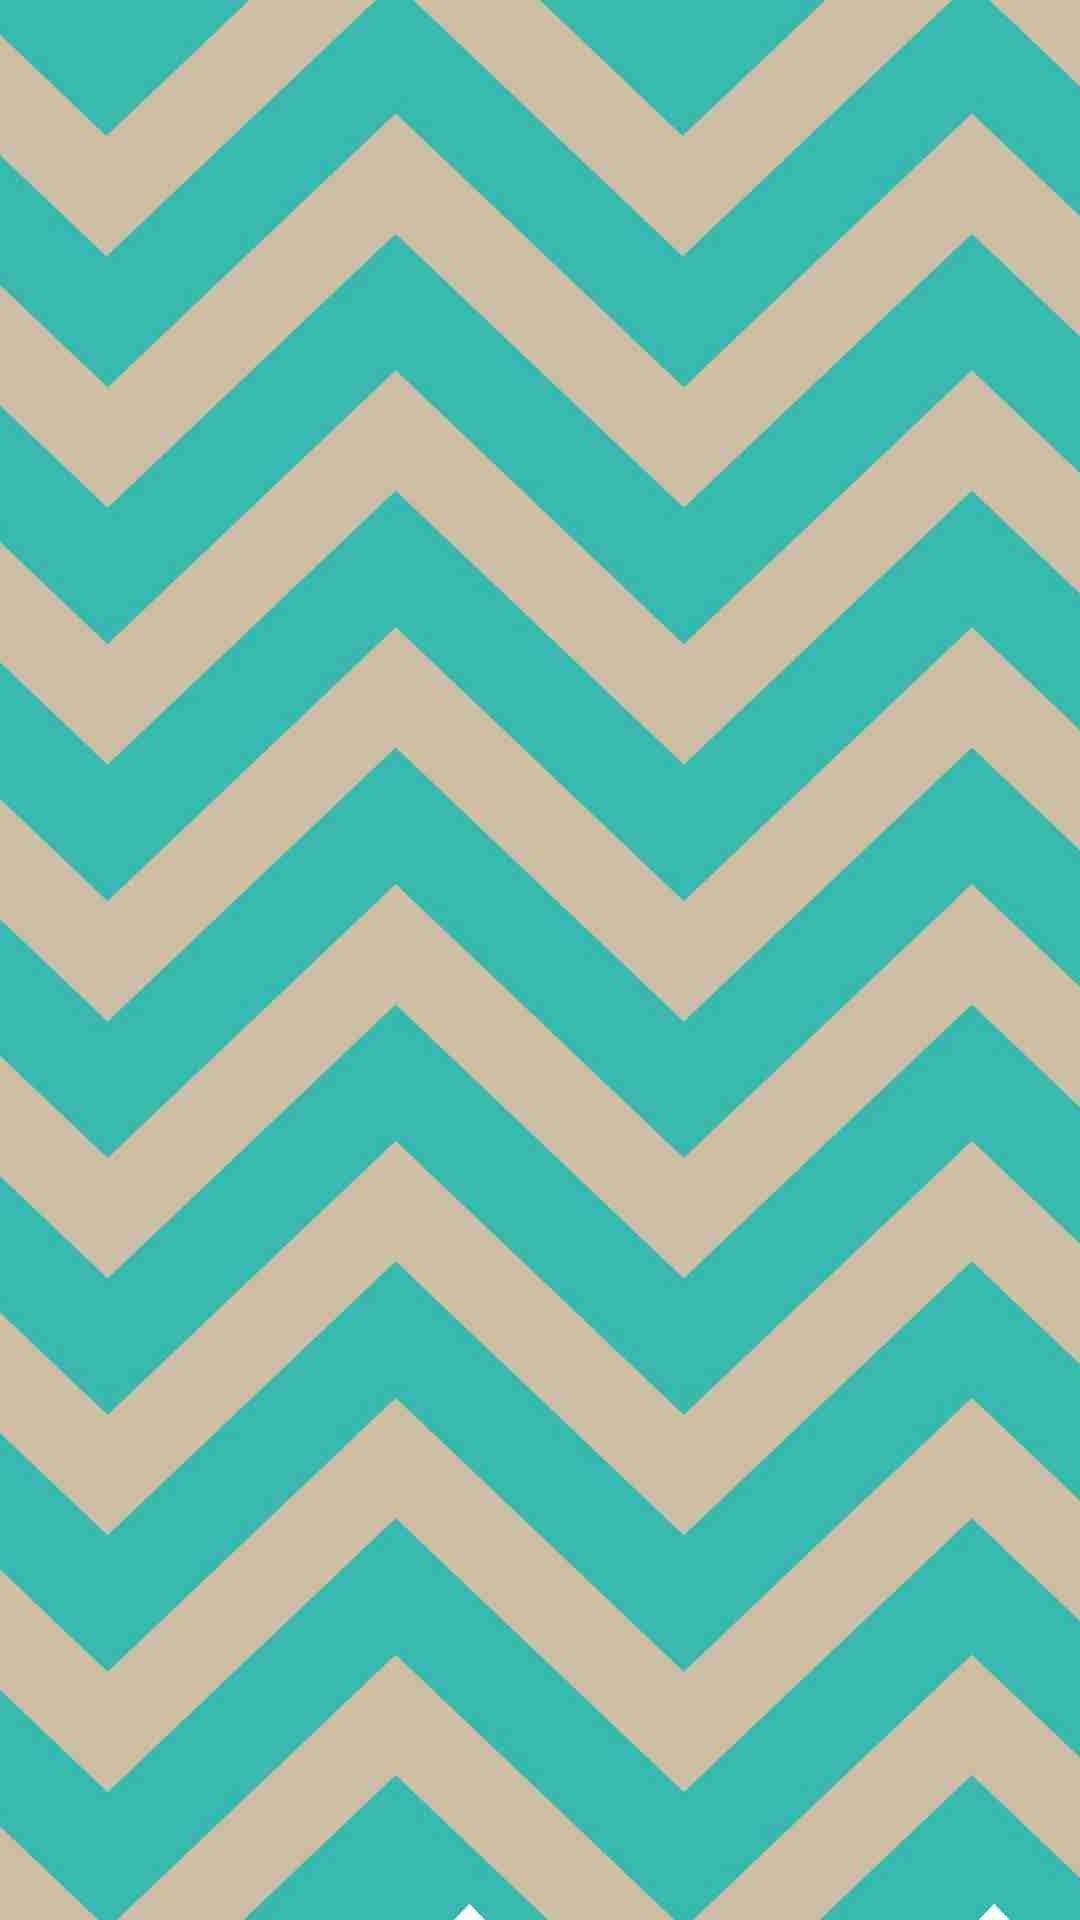 Turquoise Blue and Ivory Chevron iPhone 6 Plus Wallpaper